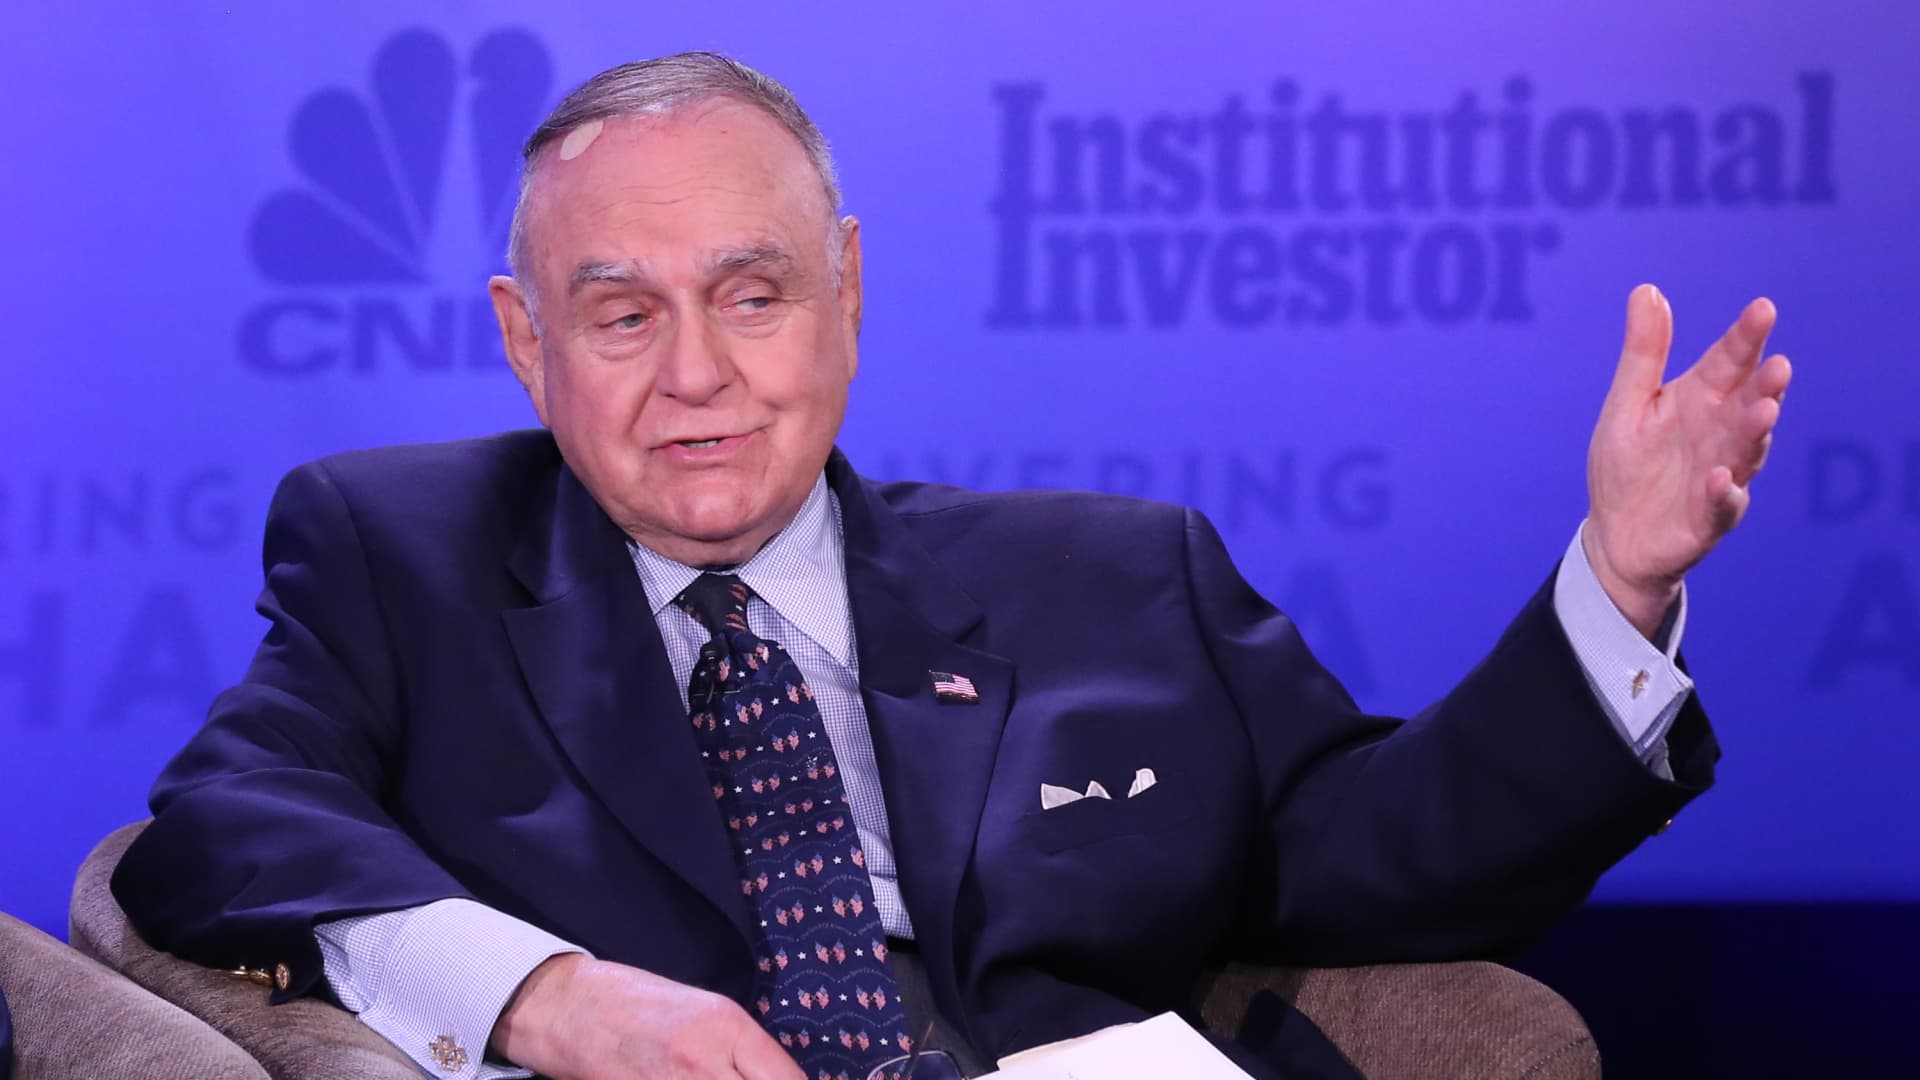 Leon Cooperman says 'too rich' stocks to go down, and long-term rates could go higher this year